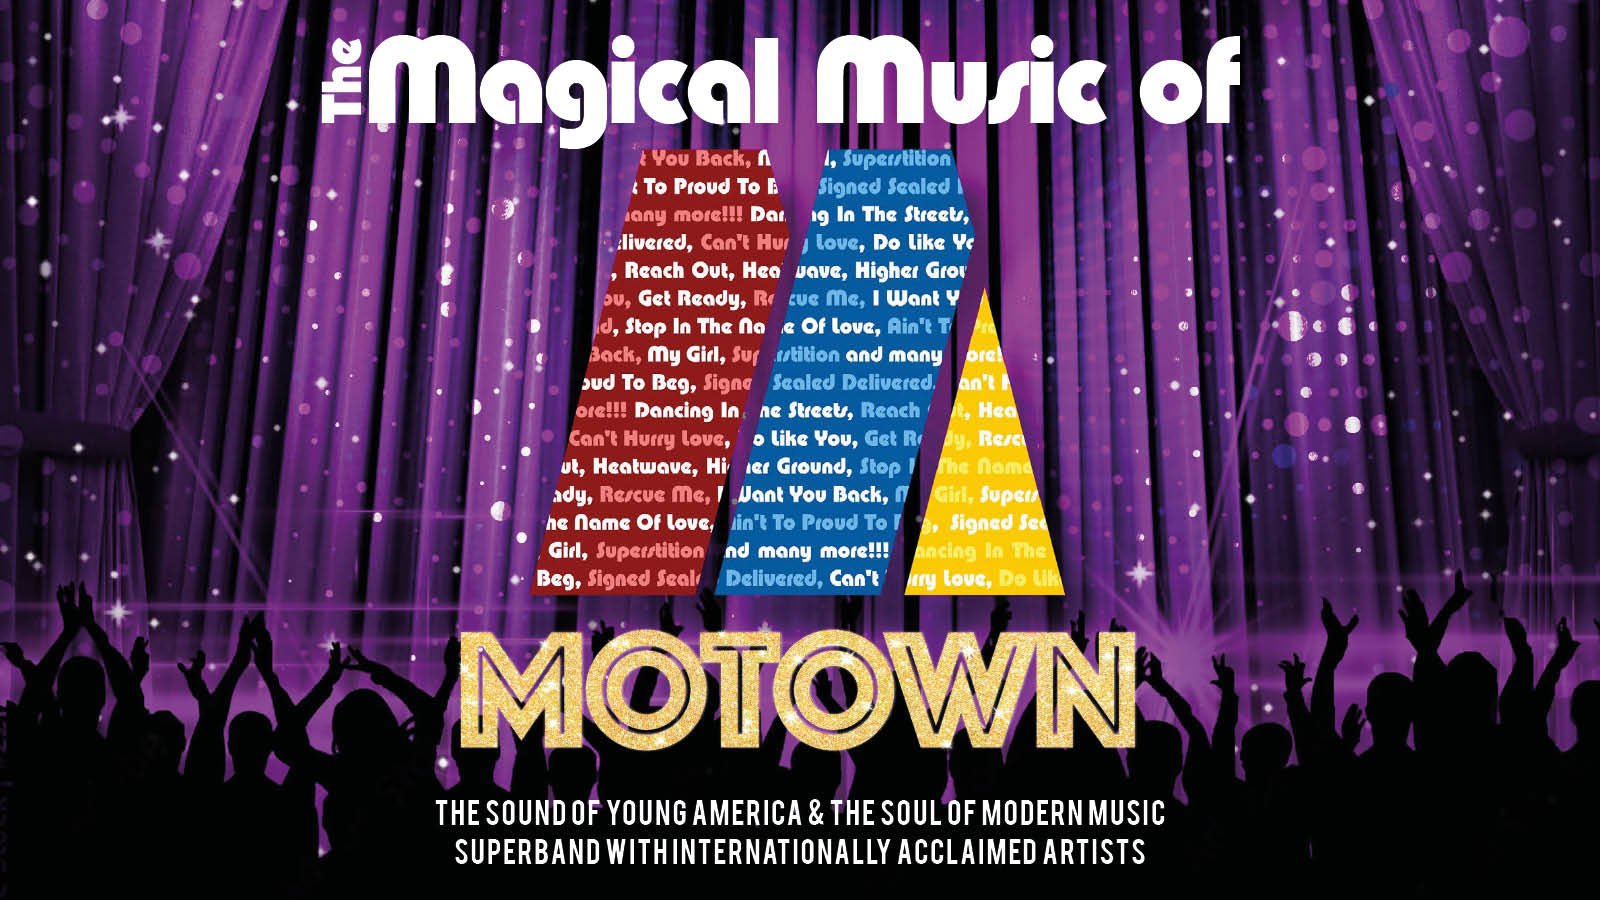 The Magical Music of Motown | The Sound of Young America and The Soul of Modern Music